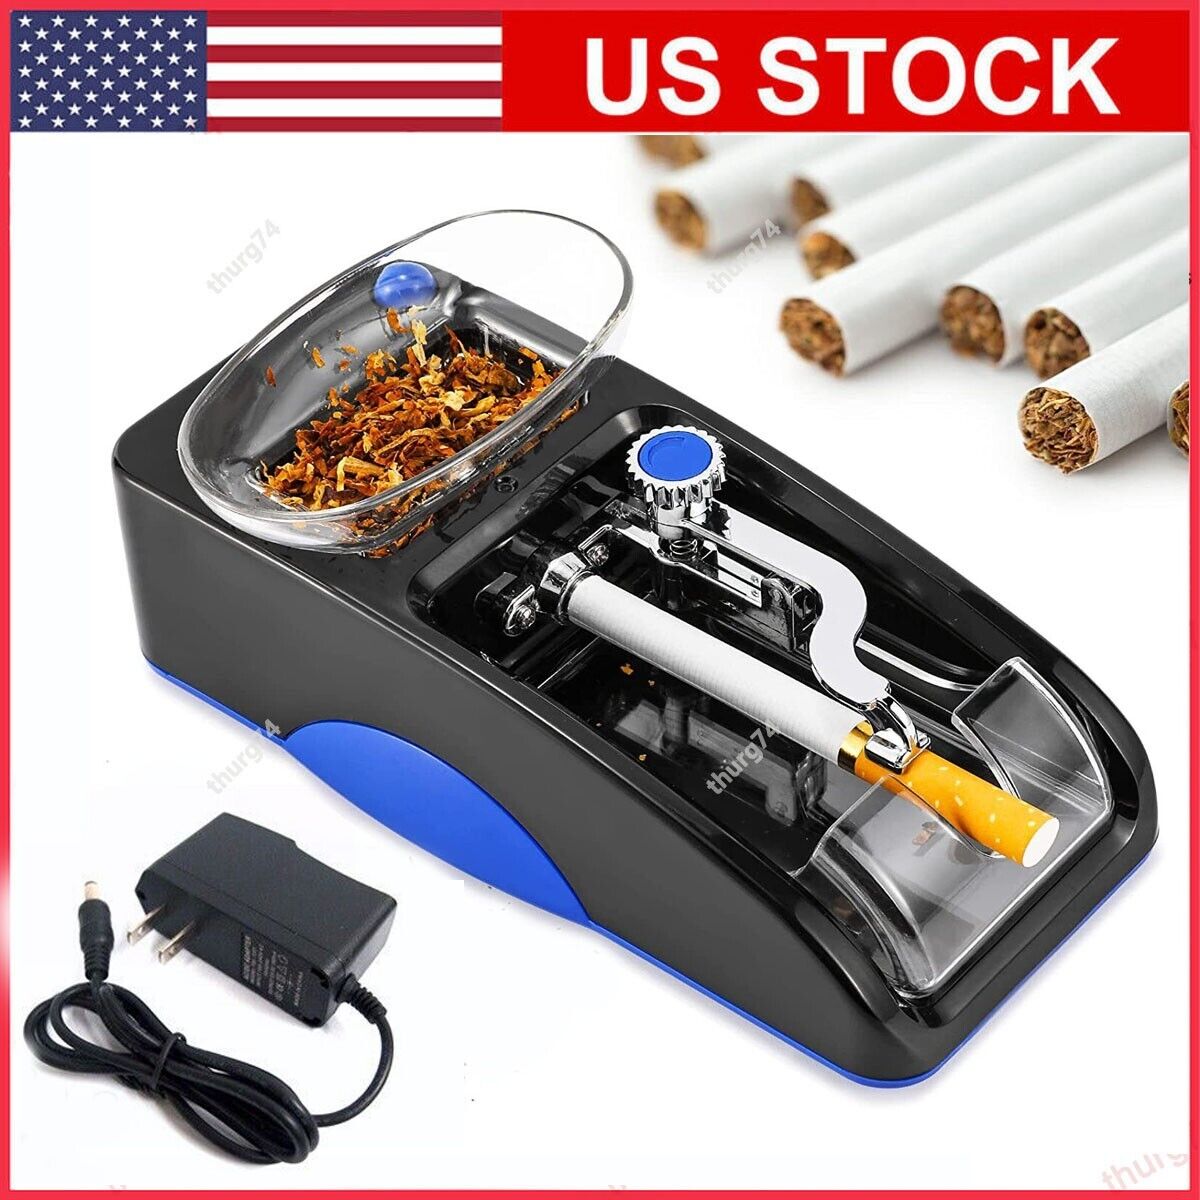 Cigarette Maker Machine Automatic Electric Rolling Roller Tobacco Injector USA